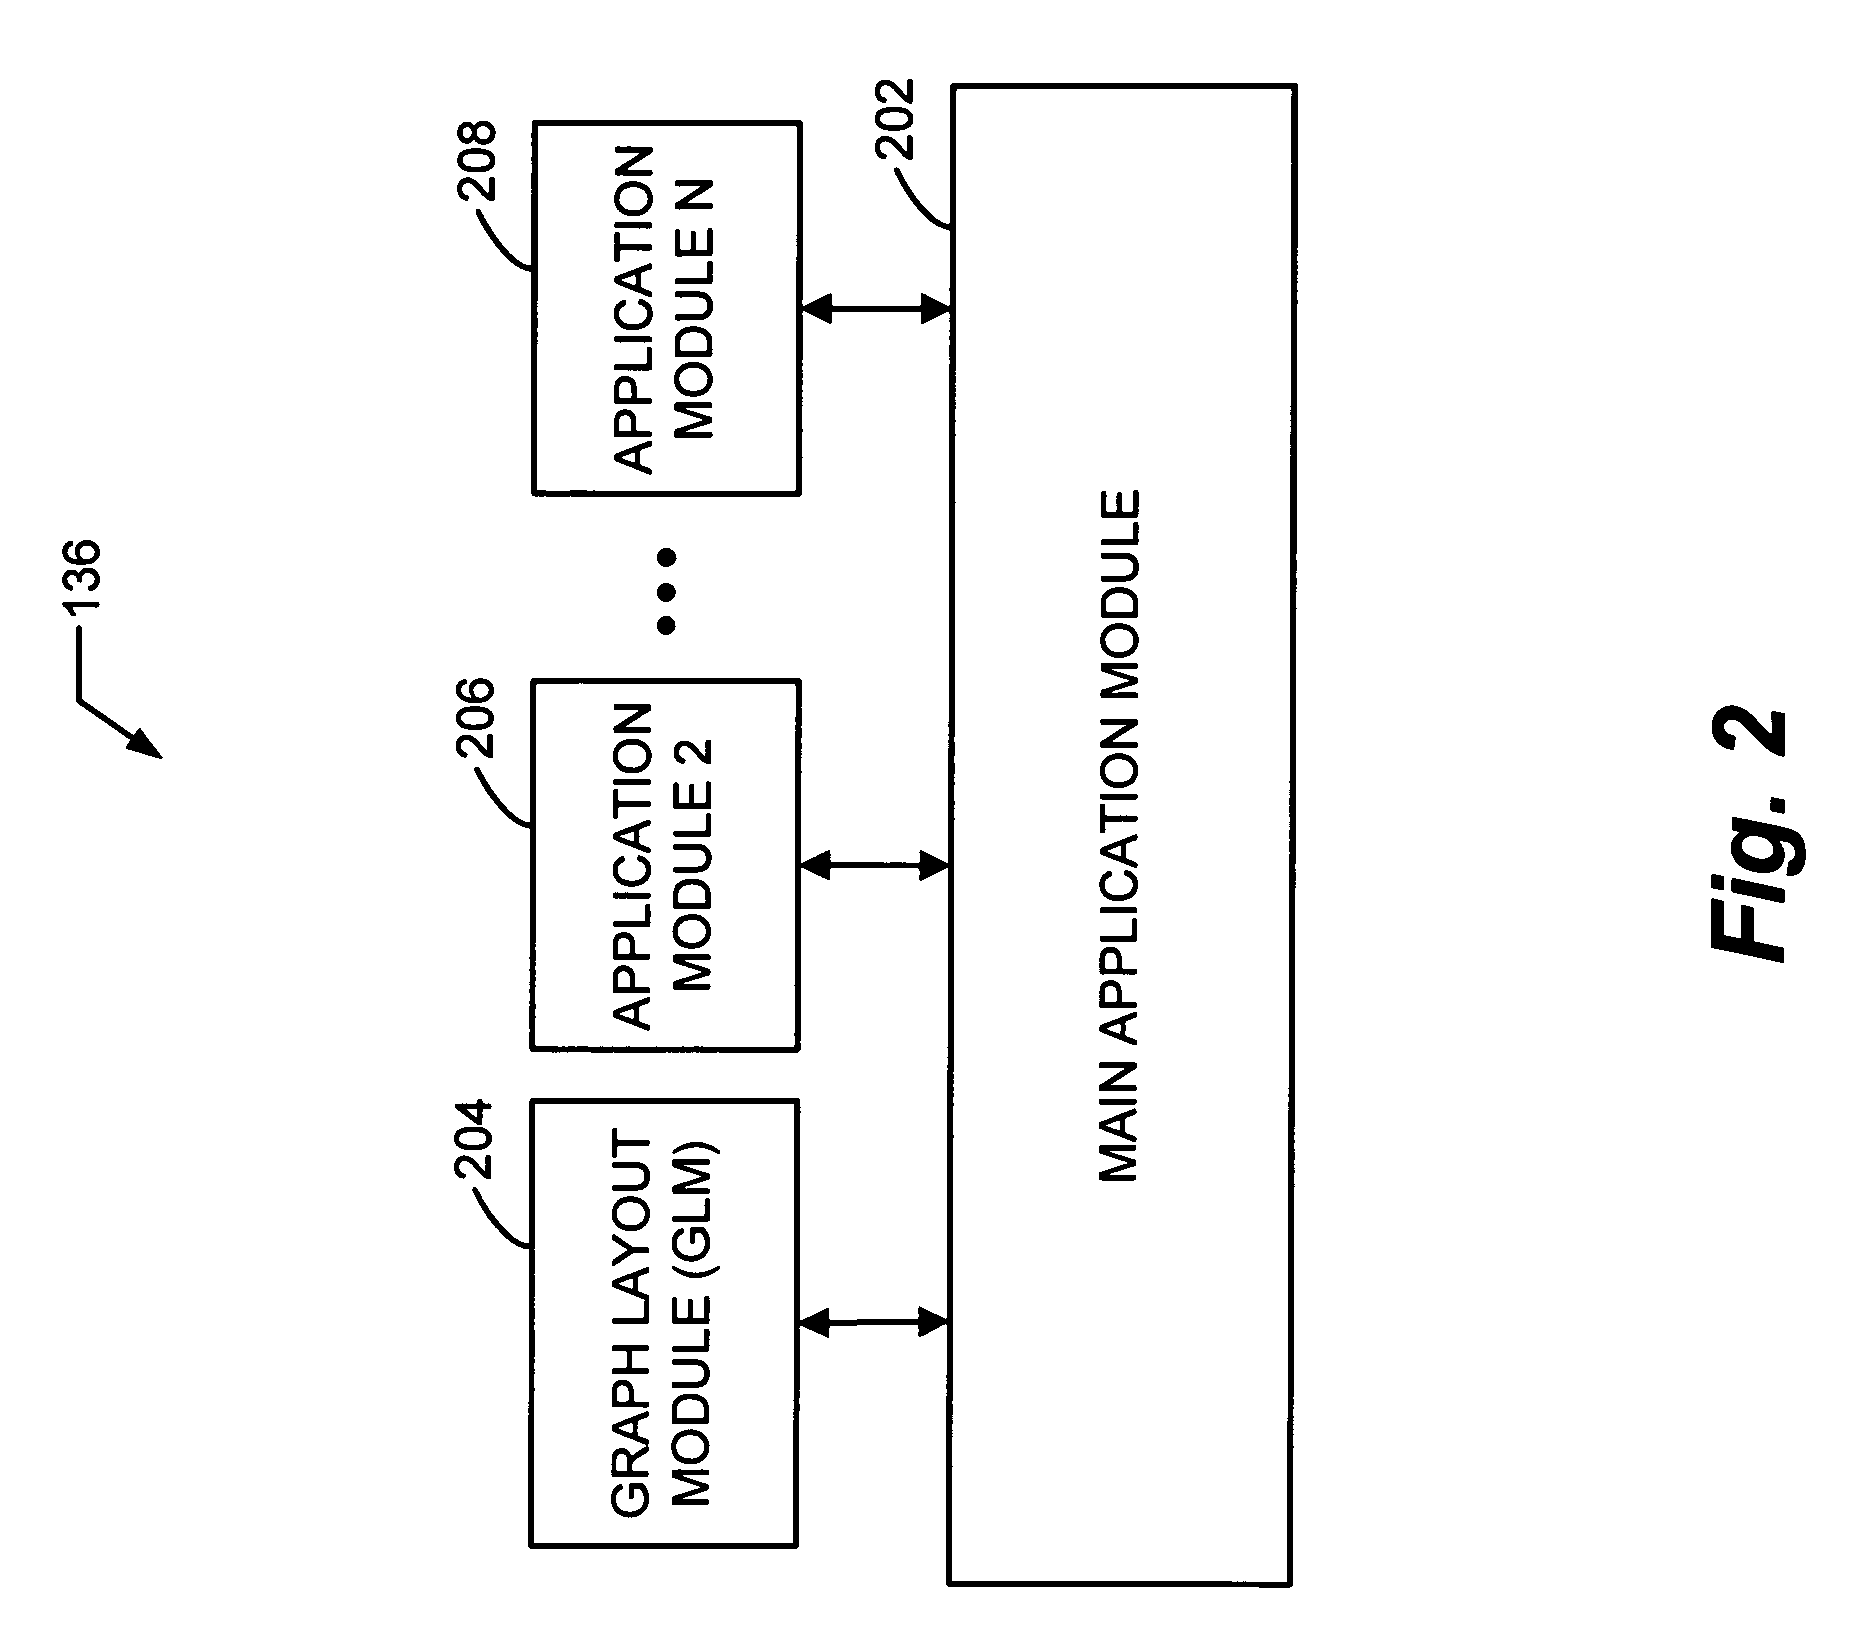 Method and system for providing a compact layout of connected nodes